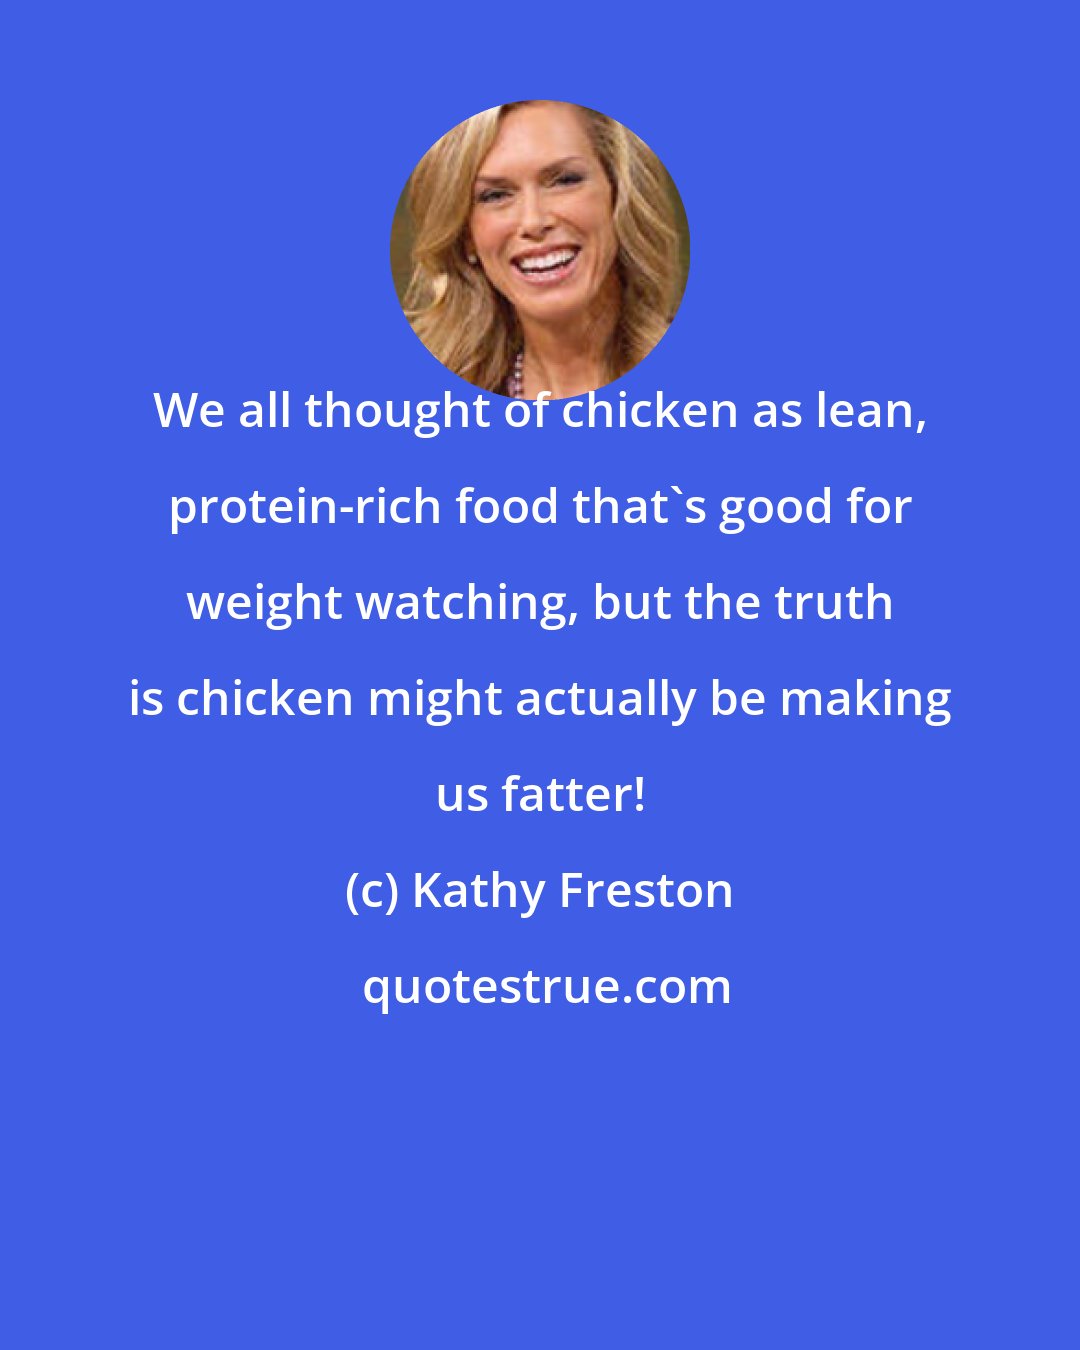 Kathy Freston: We all thought of chicken as lean, protein-rich food that's good for weight watching, but the truth is chicken might actually be making us fatter!